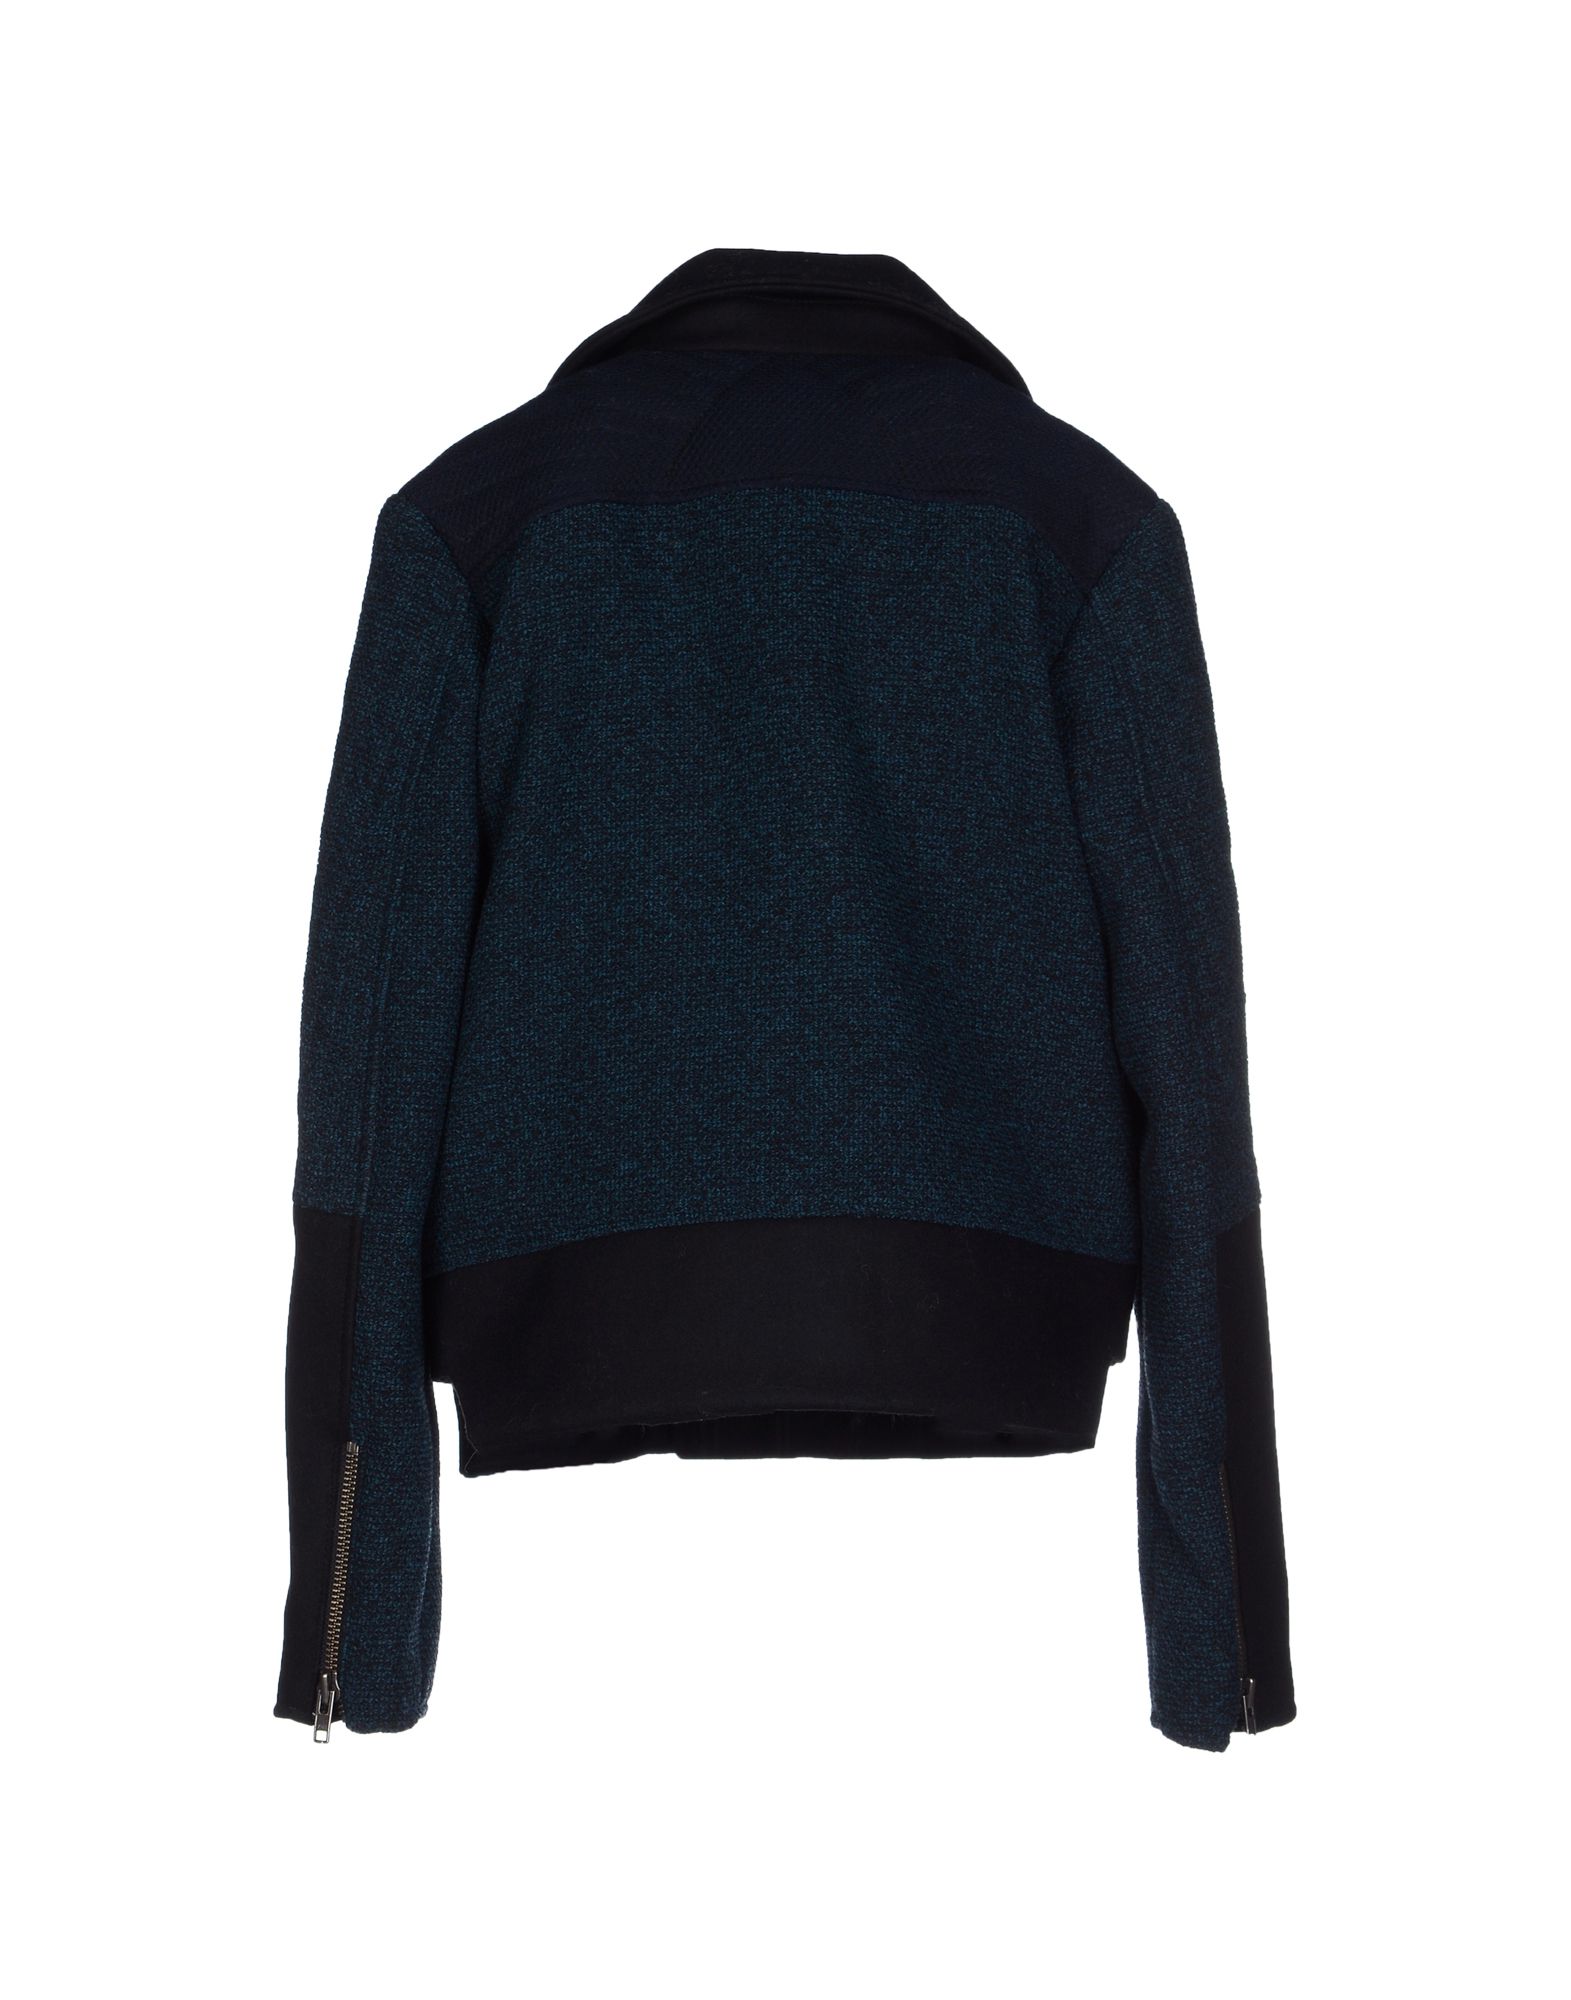 SURFACE TO AIR Women's Petrol Blue Tweed Gry Jacket $720 NEW